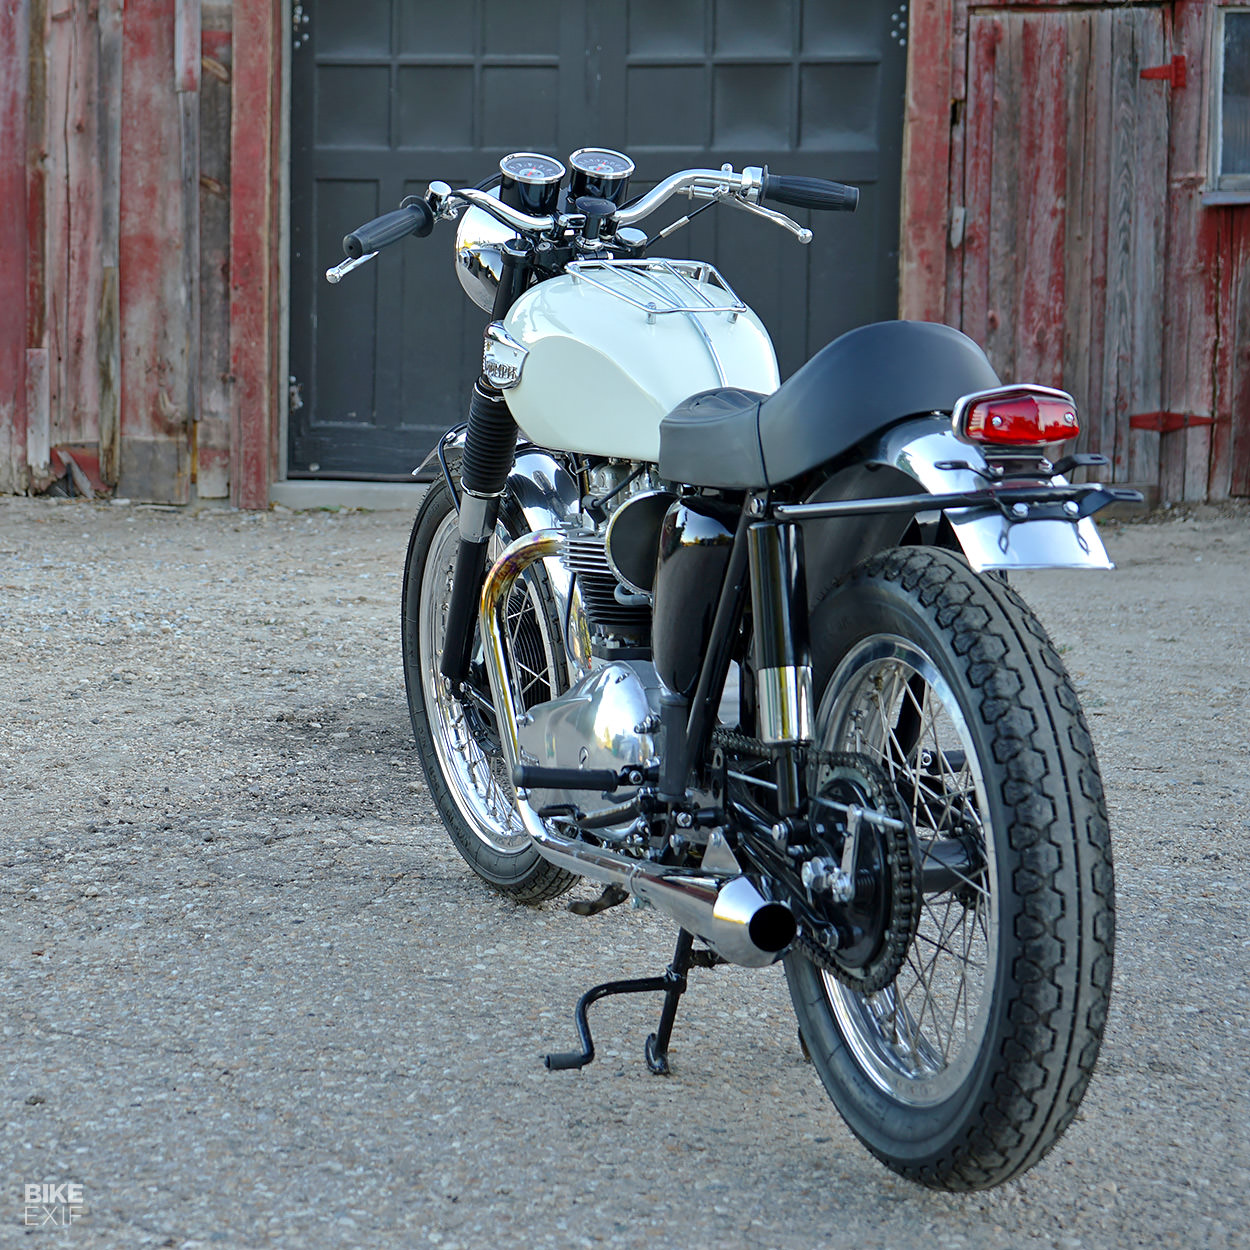 Win a motorcycle: This classic Triumph Bonneville is being raffled off for charity